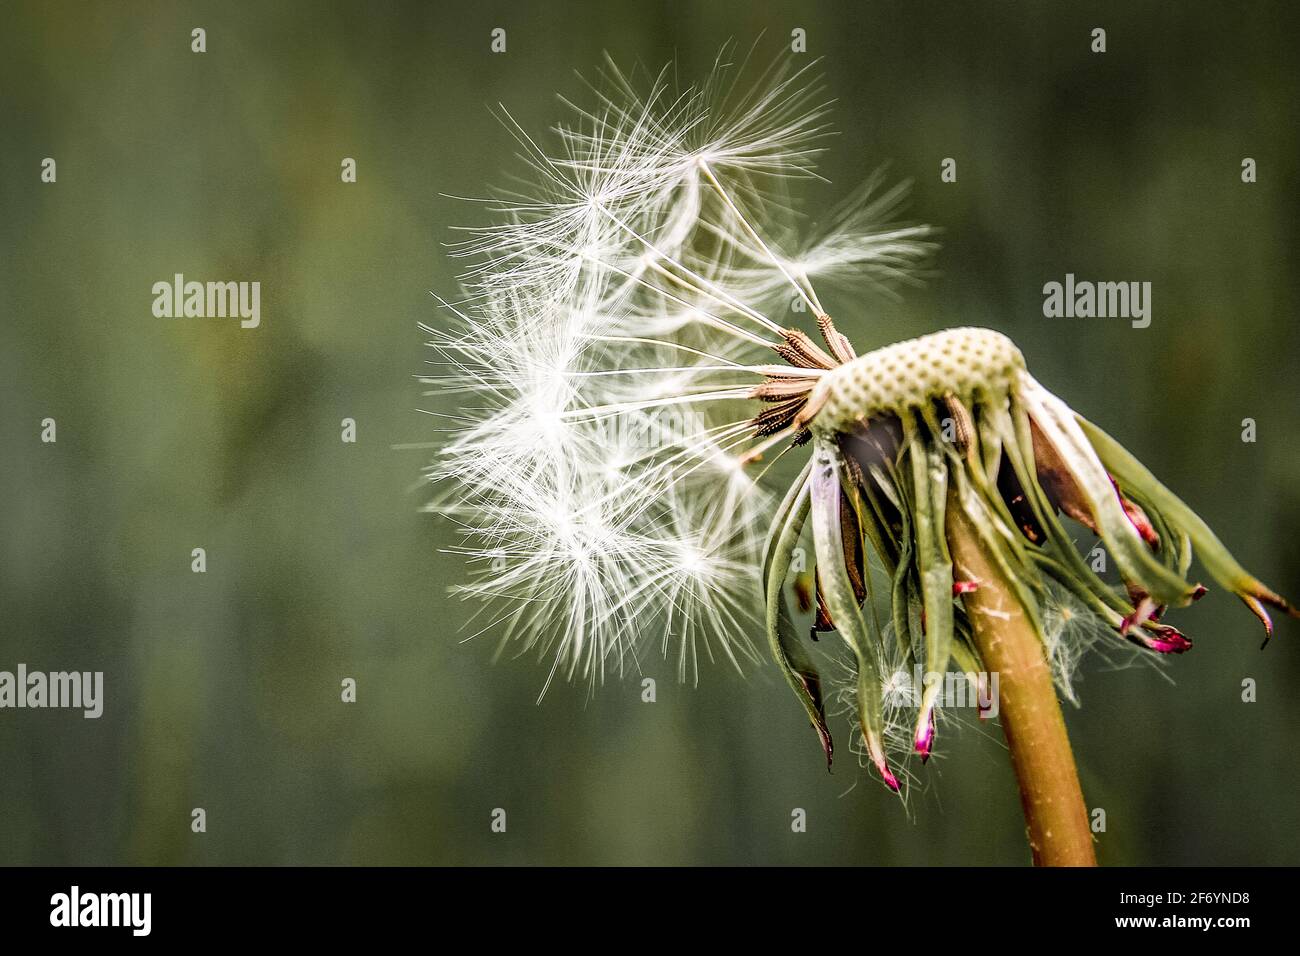 Nearly bald blowball with only a few pappus left before an out-of-focus green outdoor background Stock Photo